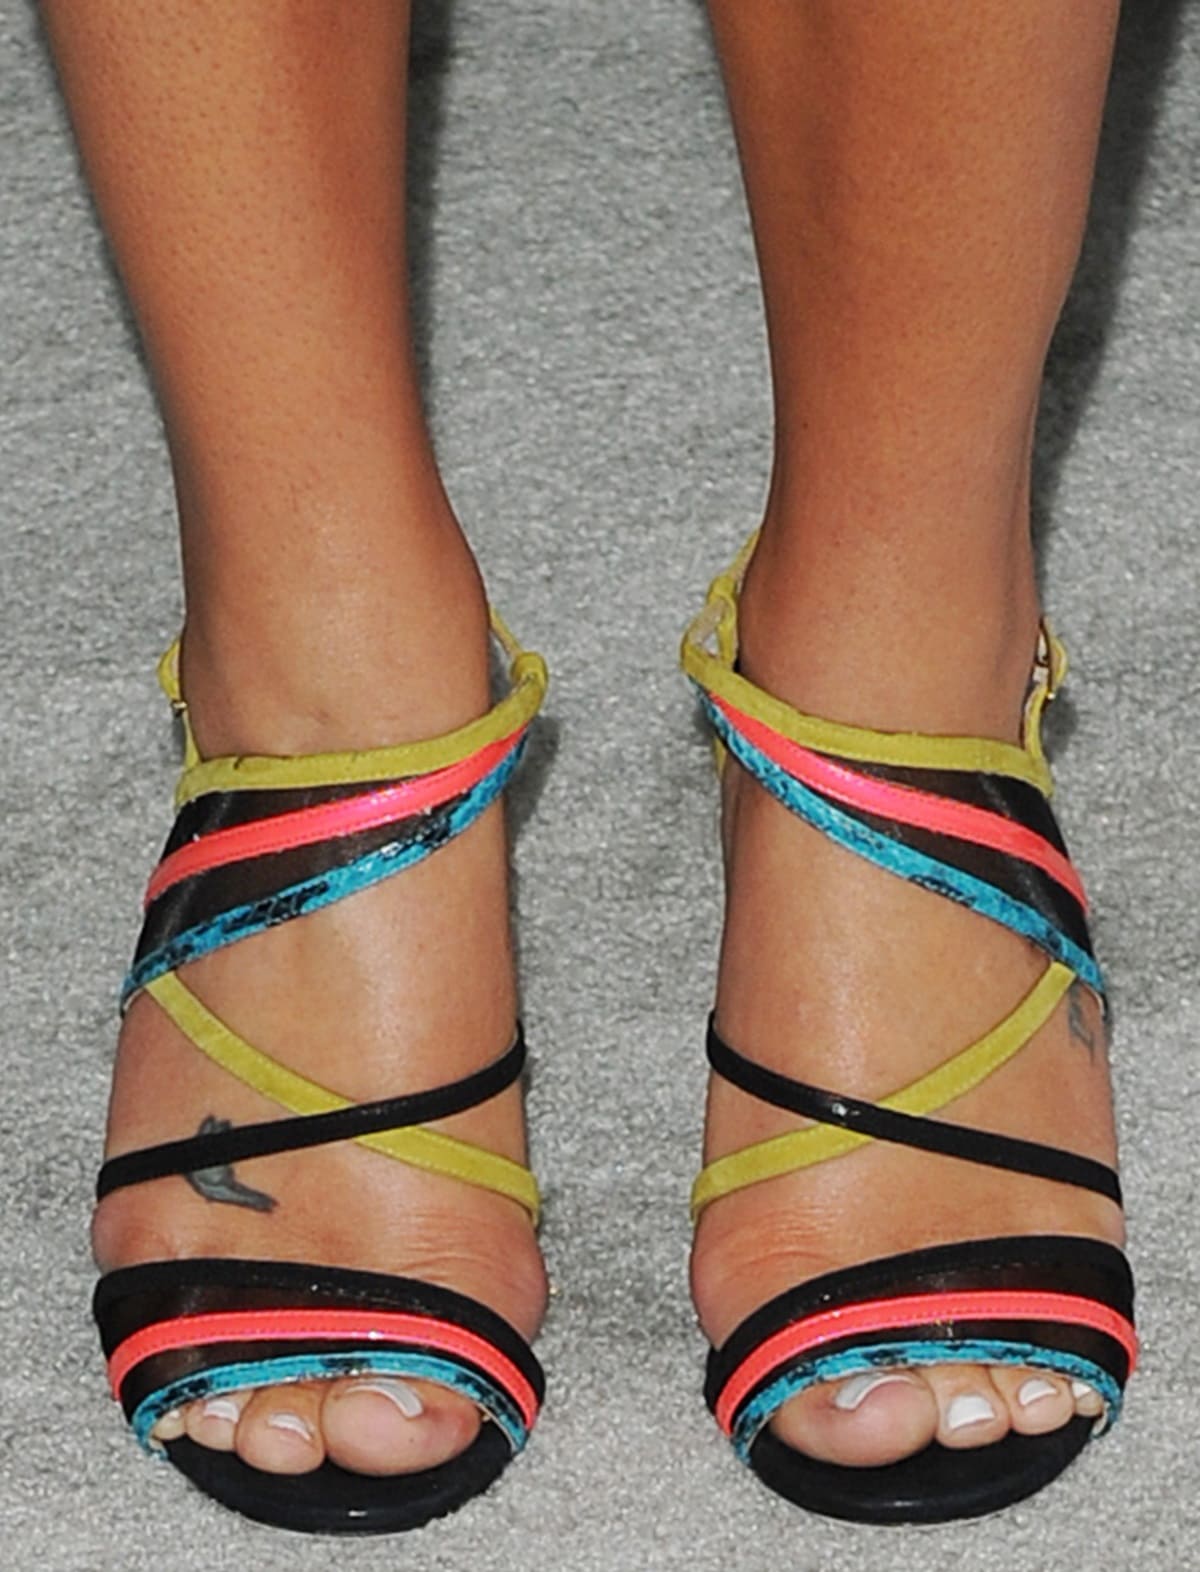 Lea Michele displays her sexy feet and toes in colorful Jimmy Choo Visby sandals at the 20th Century Fox party